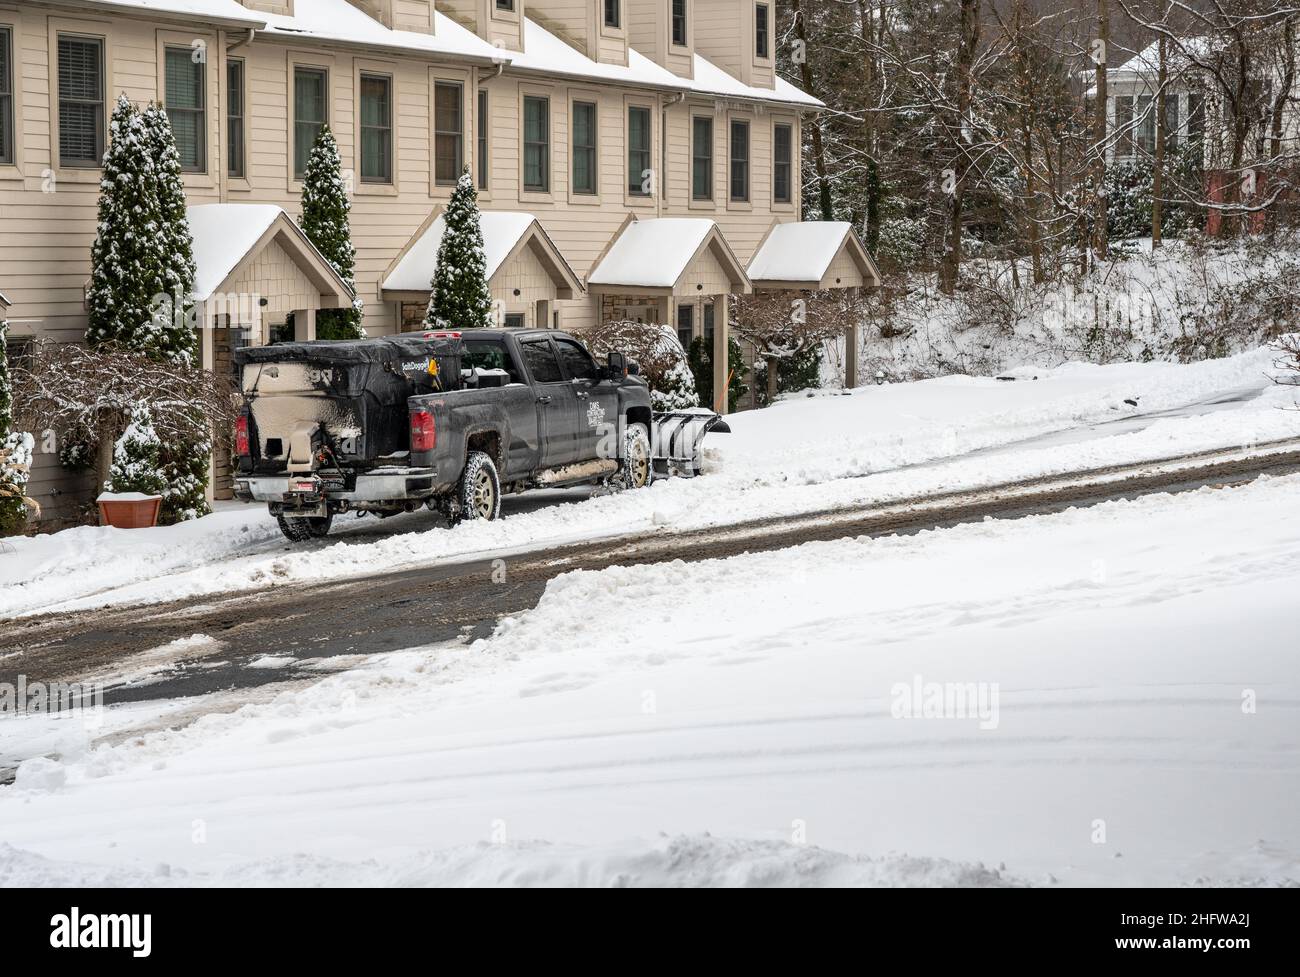 Morgantown, WV - 17 January 2022: Truck with snow plow blade attachment clearing residential street after snow storm Stock Photo